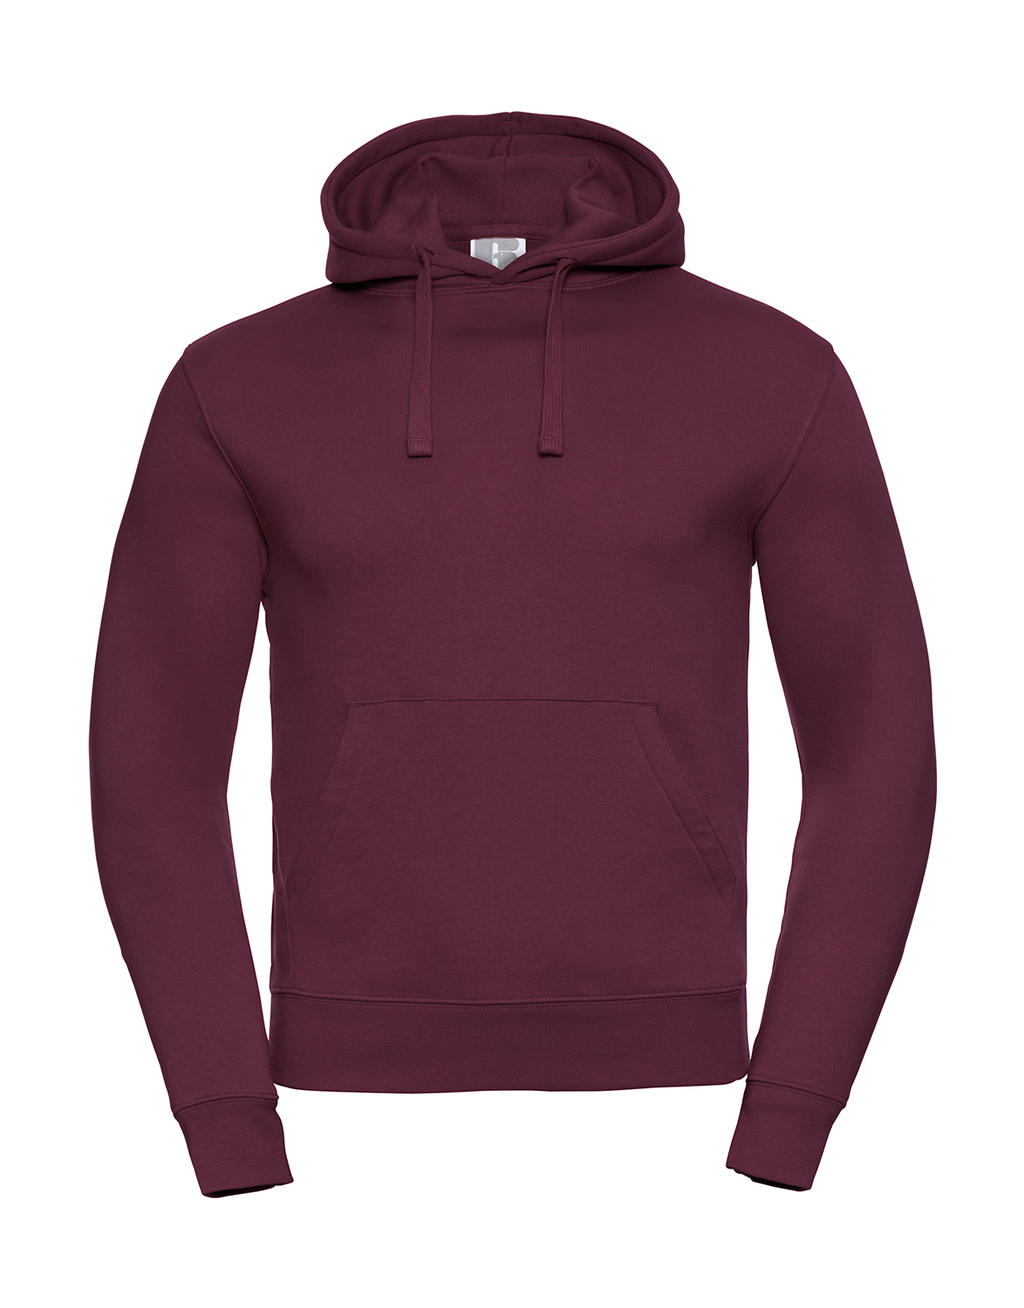  Mens Authentic Hooded Sweat in Farbe Burgundy